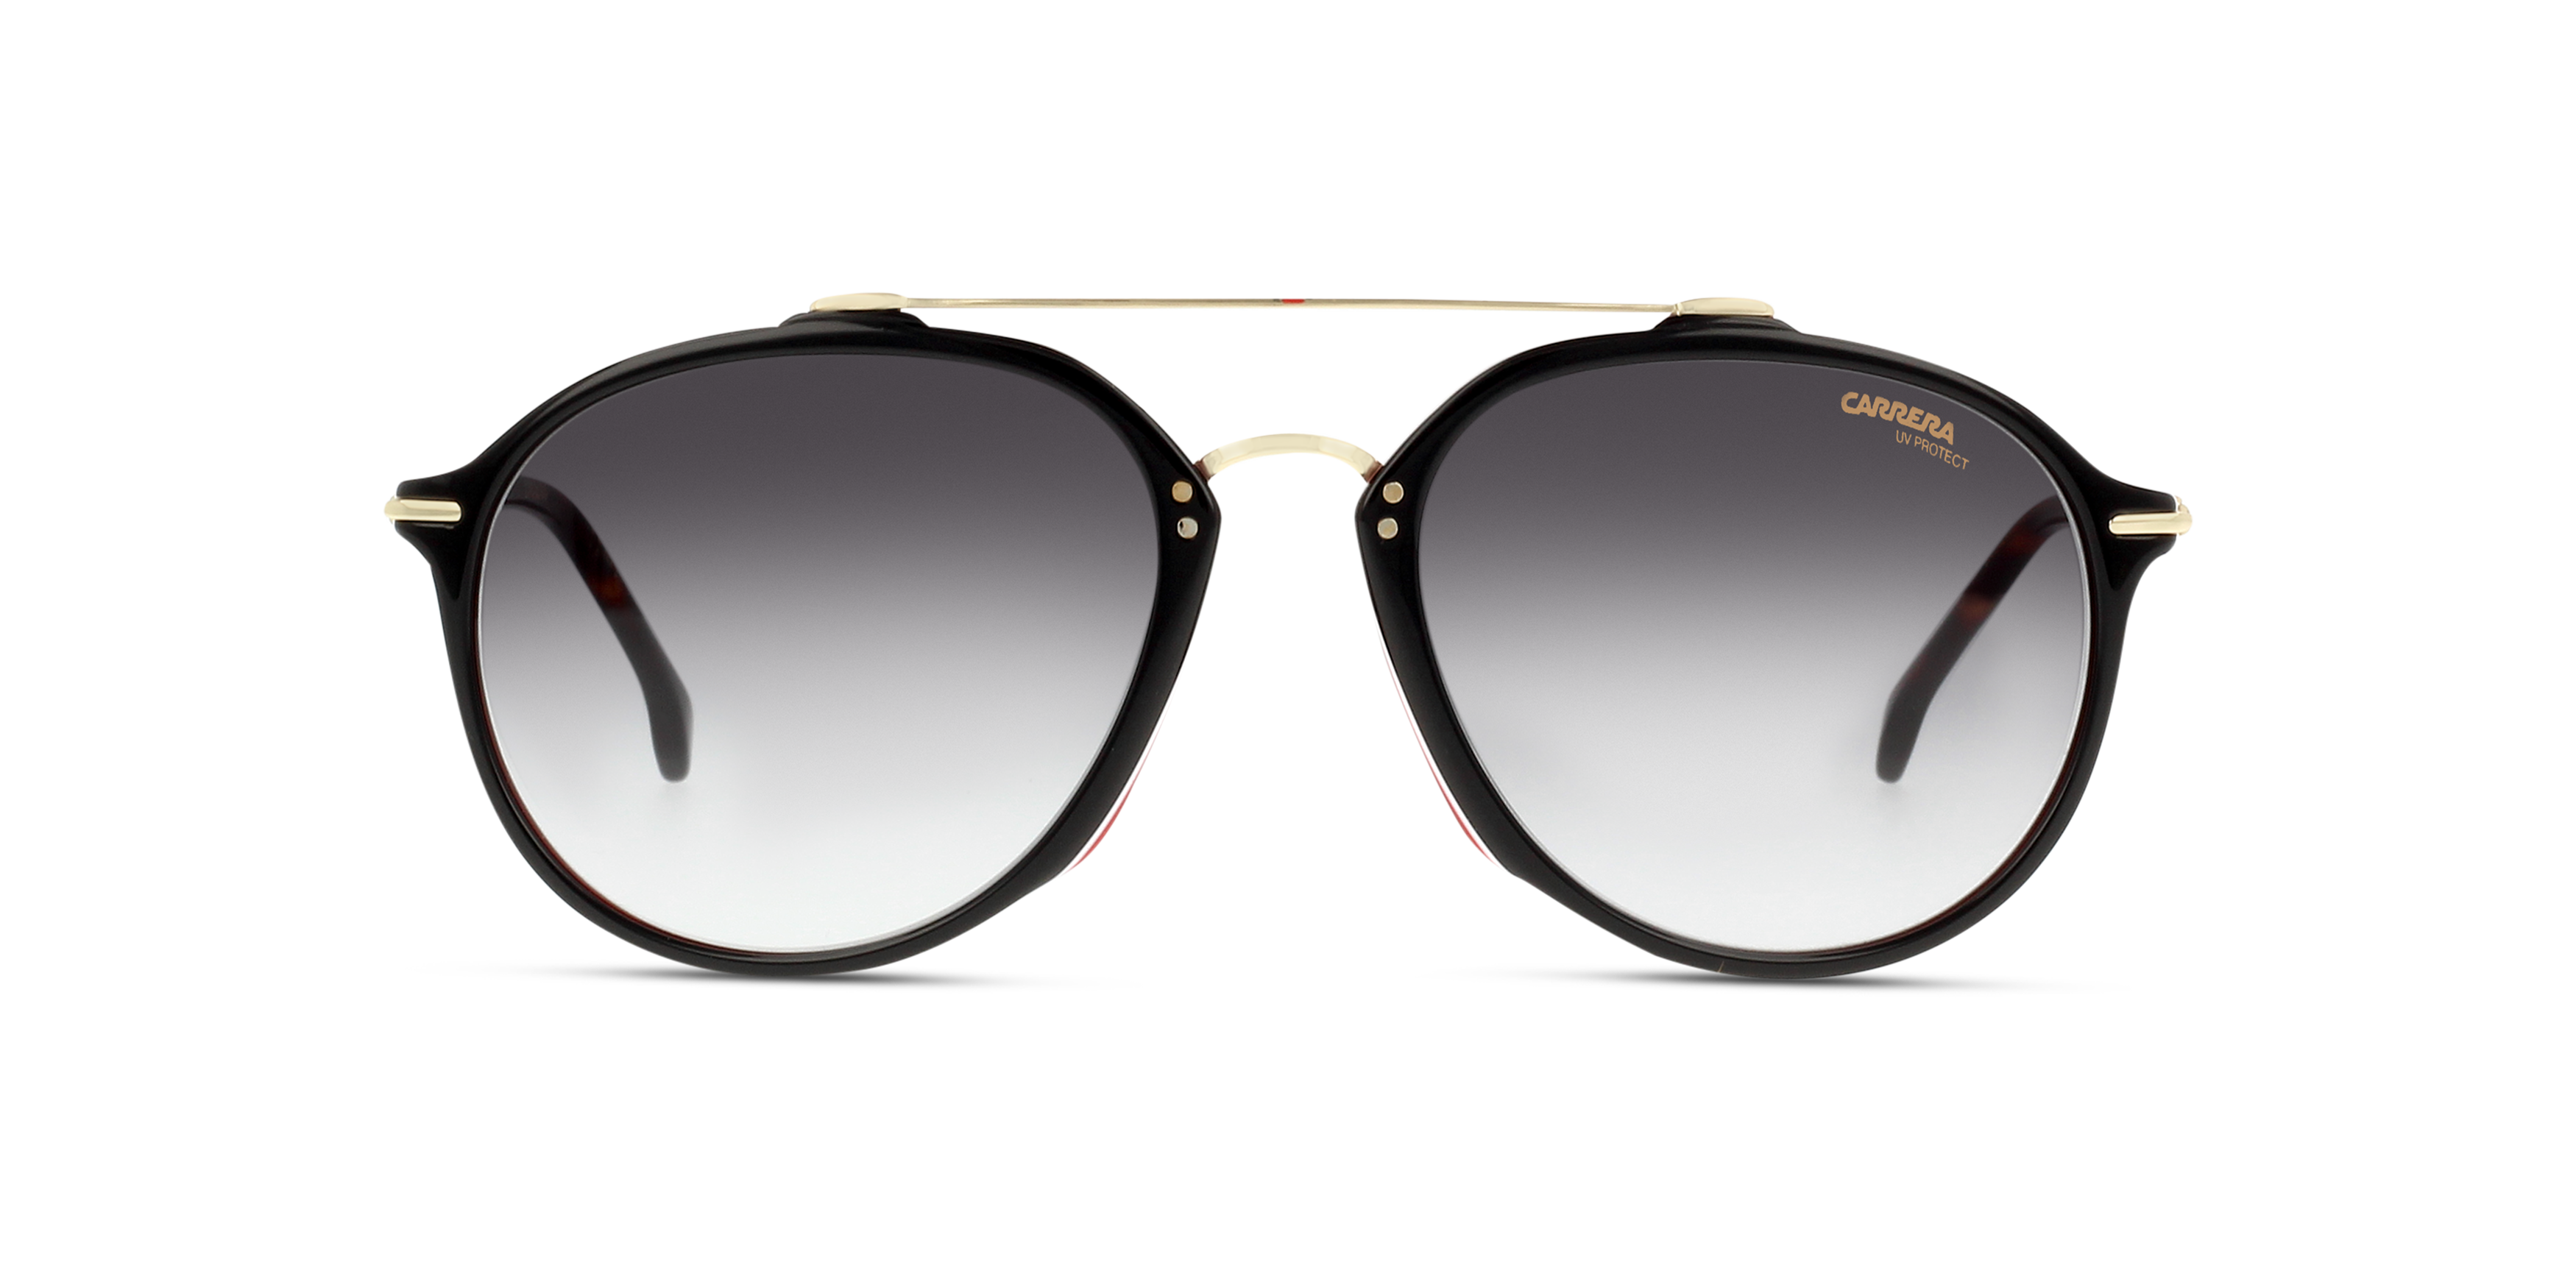 [products.image.front] CARRERA CARRERA 171/S WR7/9O